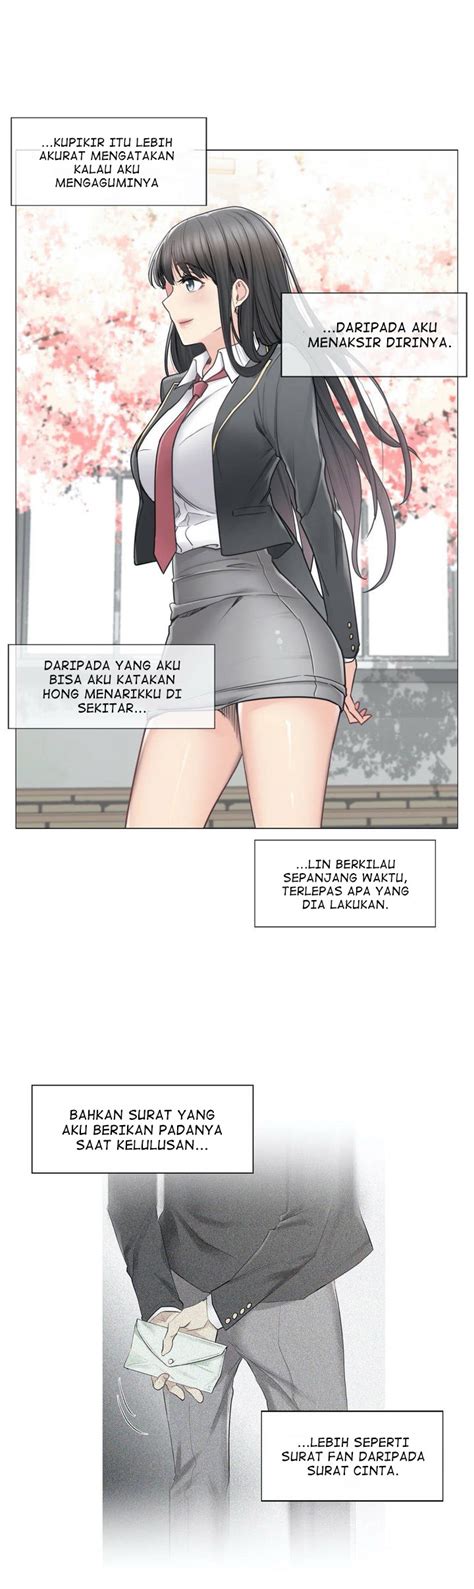 Read touch to unlock chapter 1 online for free at mangahub.io. Touch to Unlock - Chapter 45 - Baca Manga Jepang Sub Indo ...